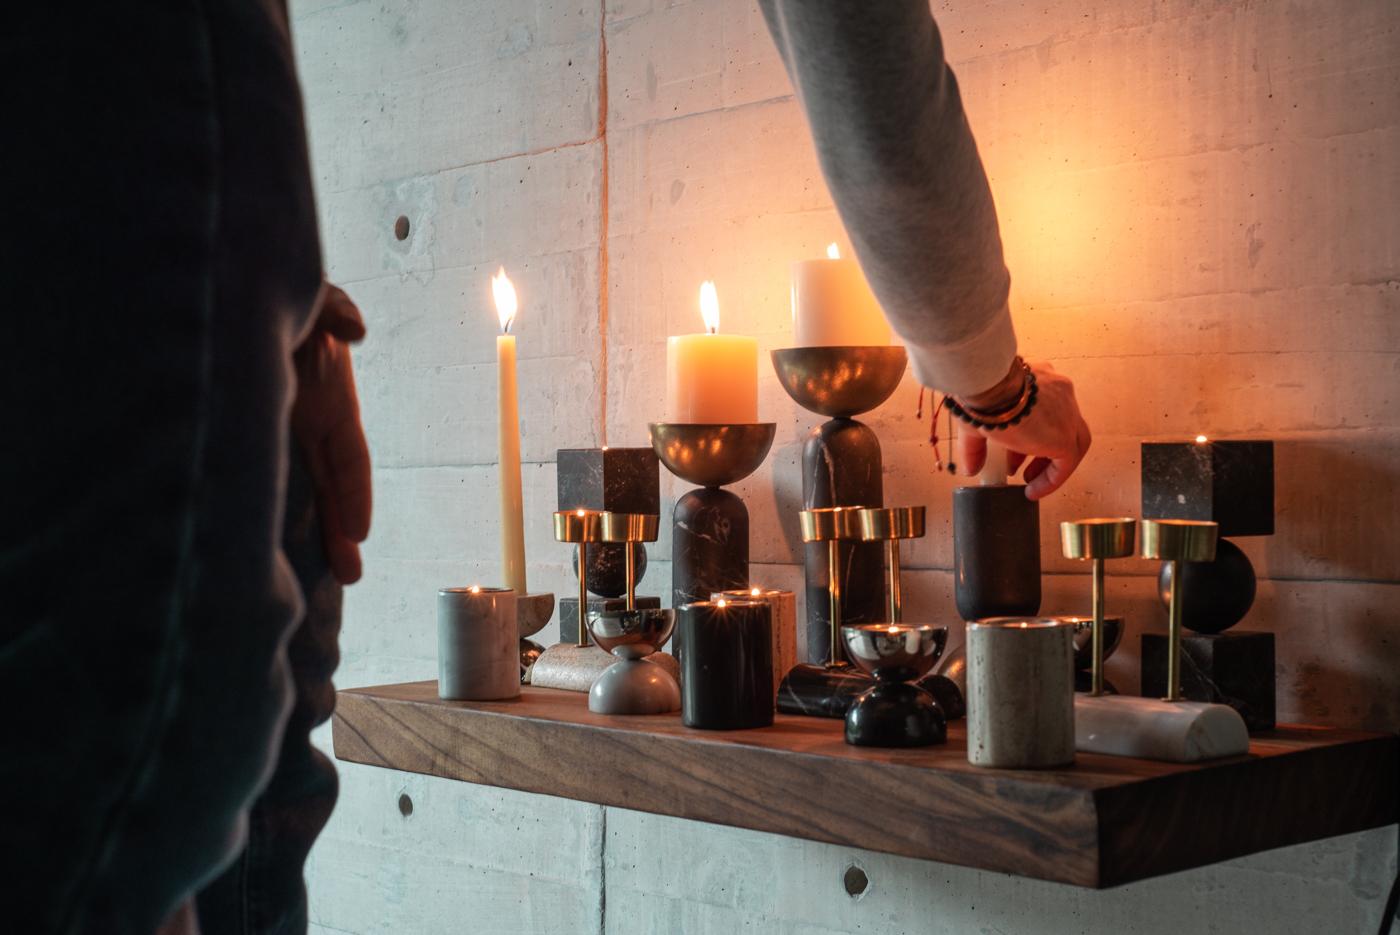 Indulge in the understated sophistication of the Gova candle holders by Bruci. These candle holders exude an air of refinement with their minimalist yet imposing design, elevating any living space with a touch of luxury. The brushed nickel-plated